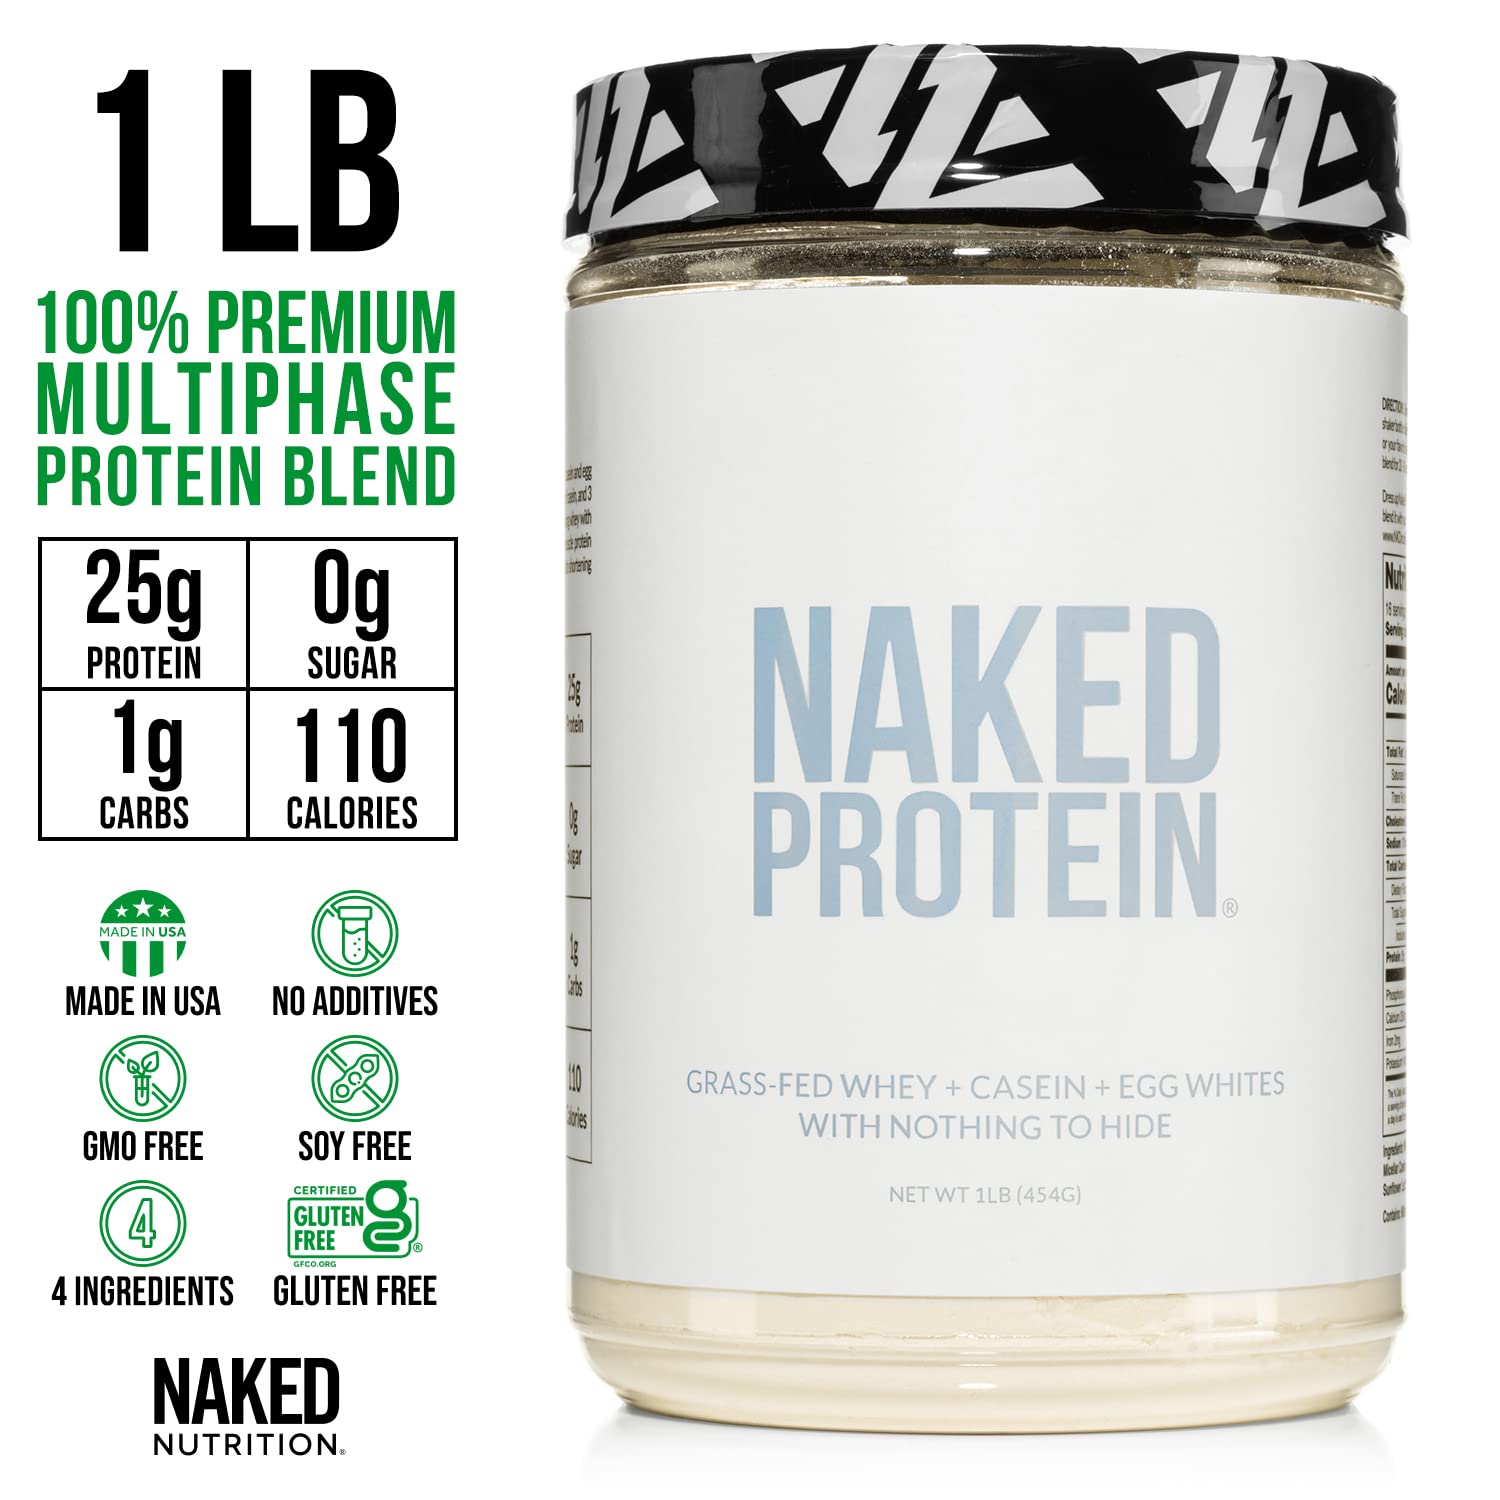 Naked Protein Powder Blend - Egg, Whey and Casein Protein Blend - image 4 of 7